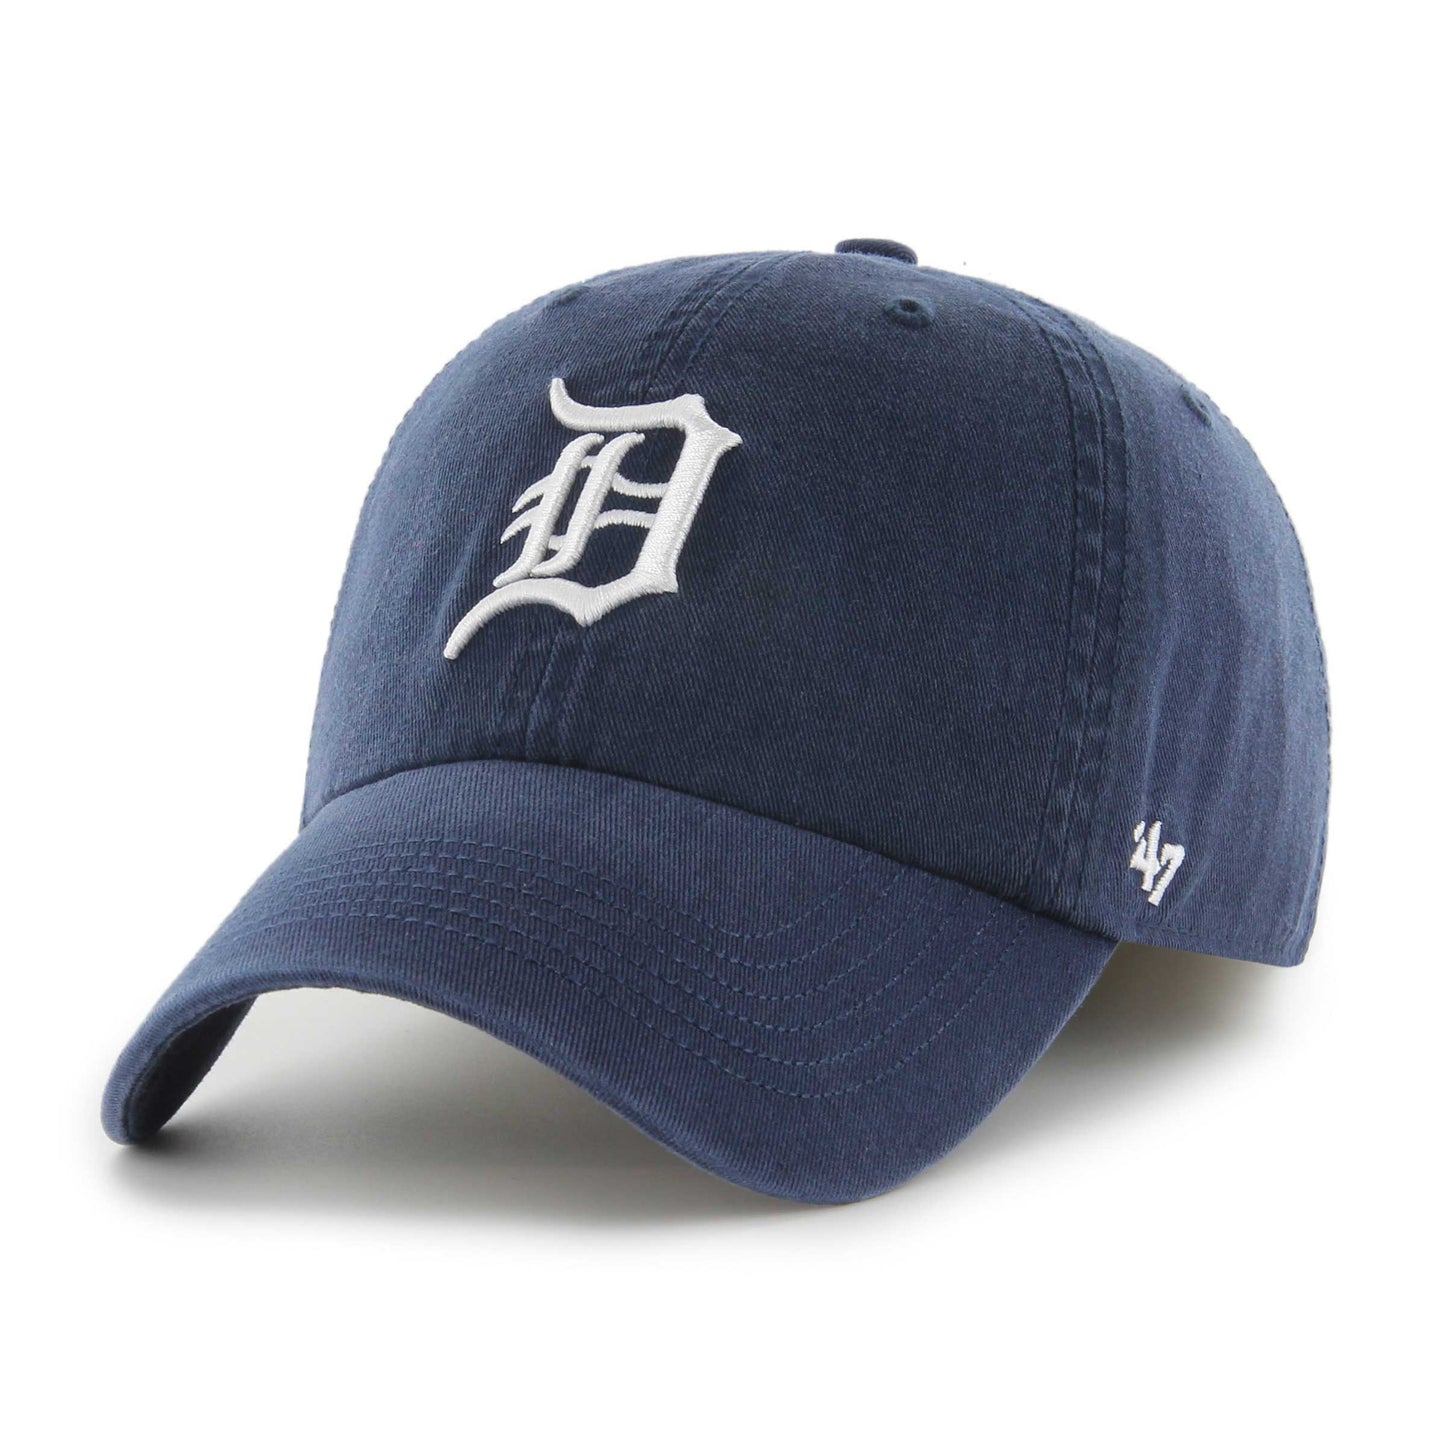 Detroit Tigers '47 Franchise Logo Fitted Hat - Navy